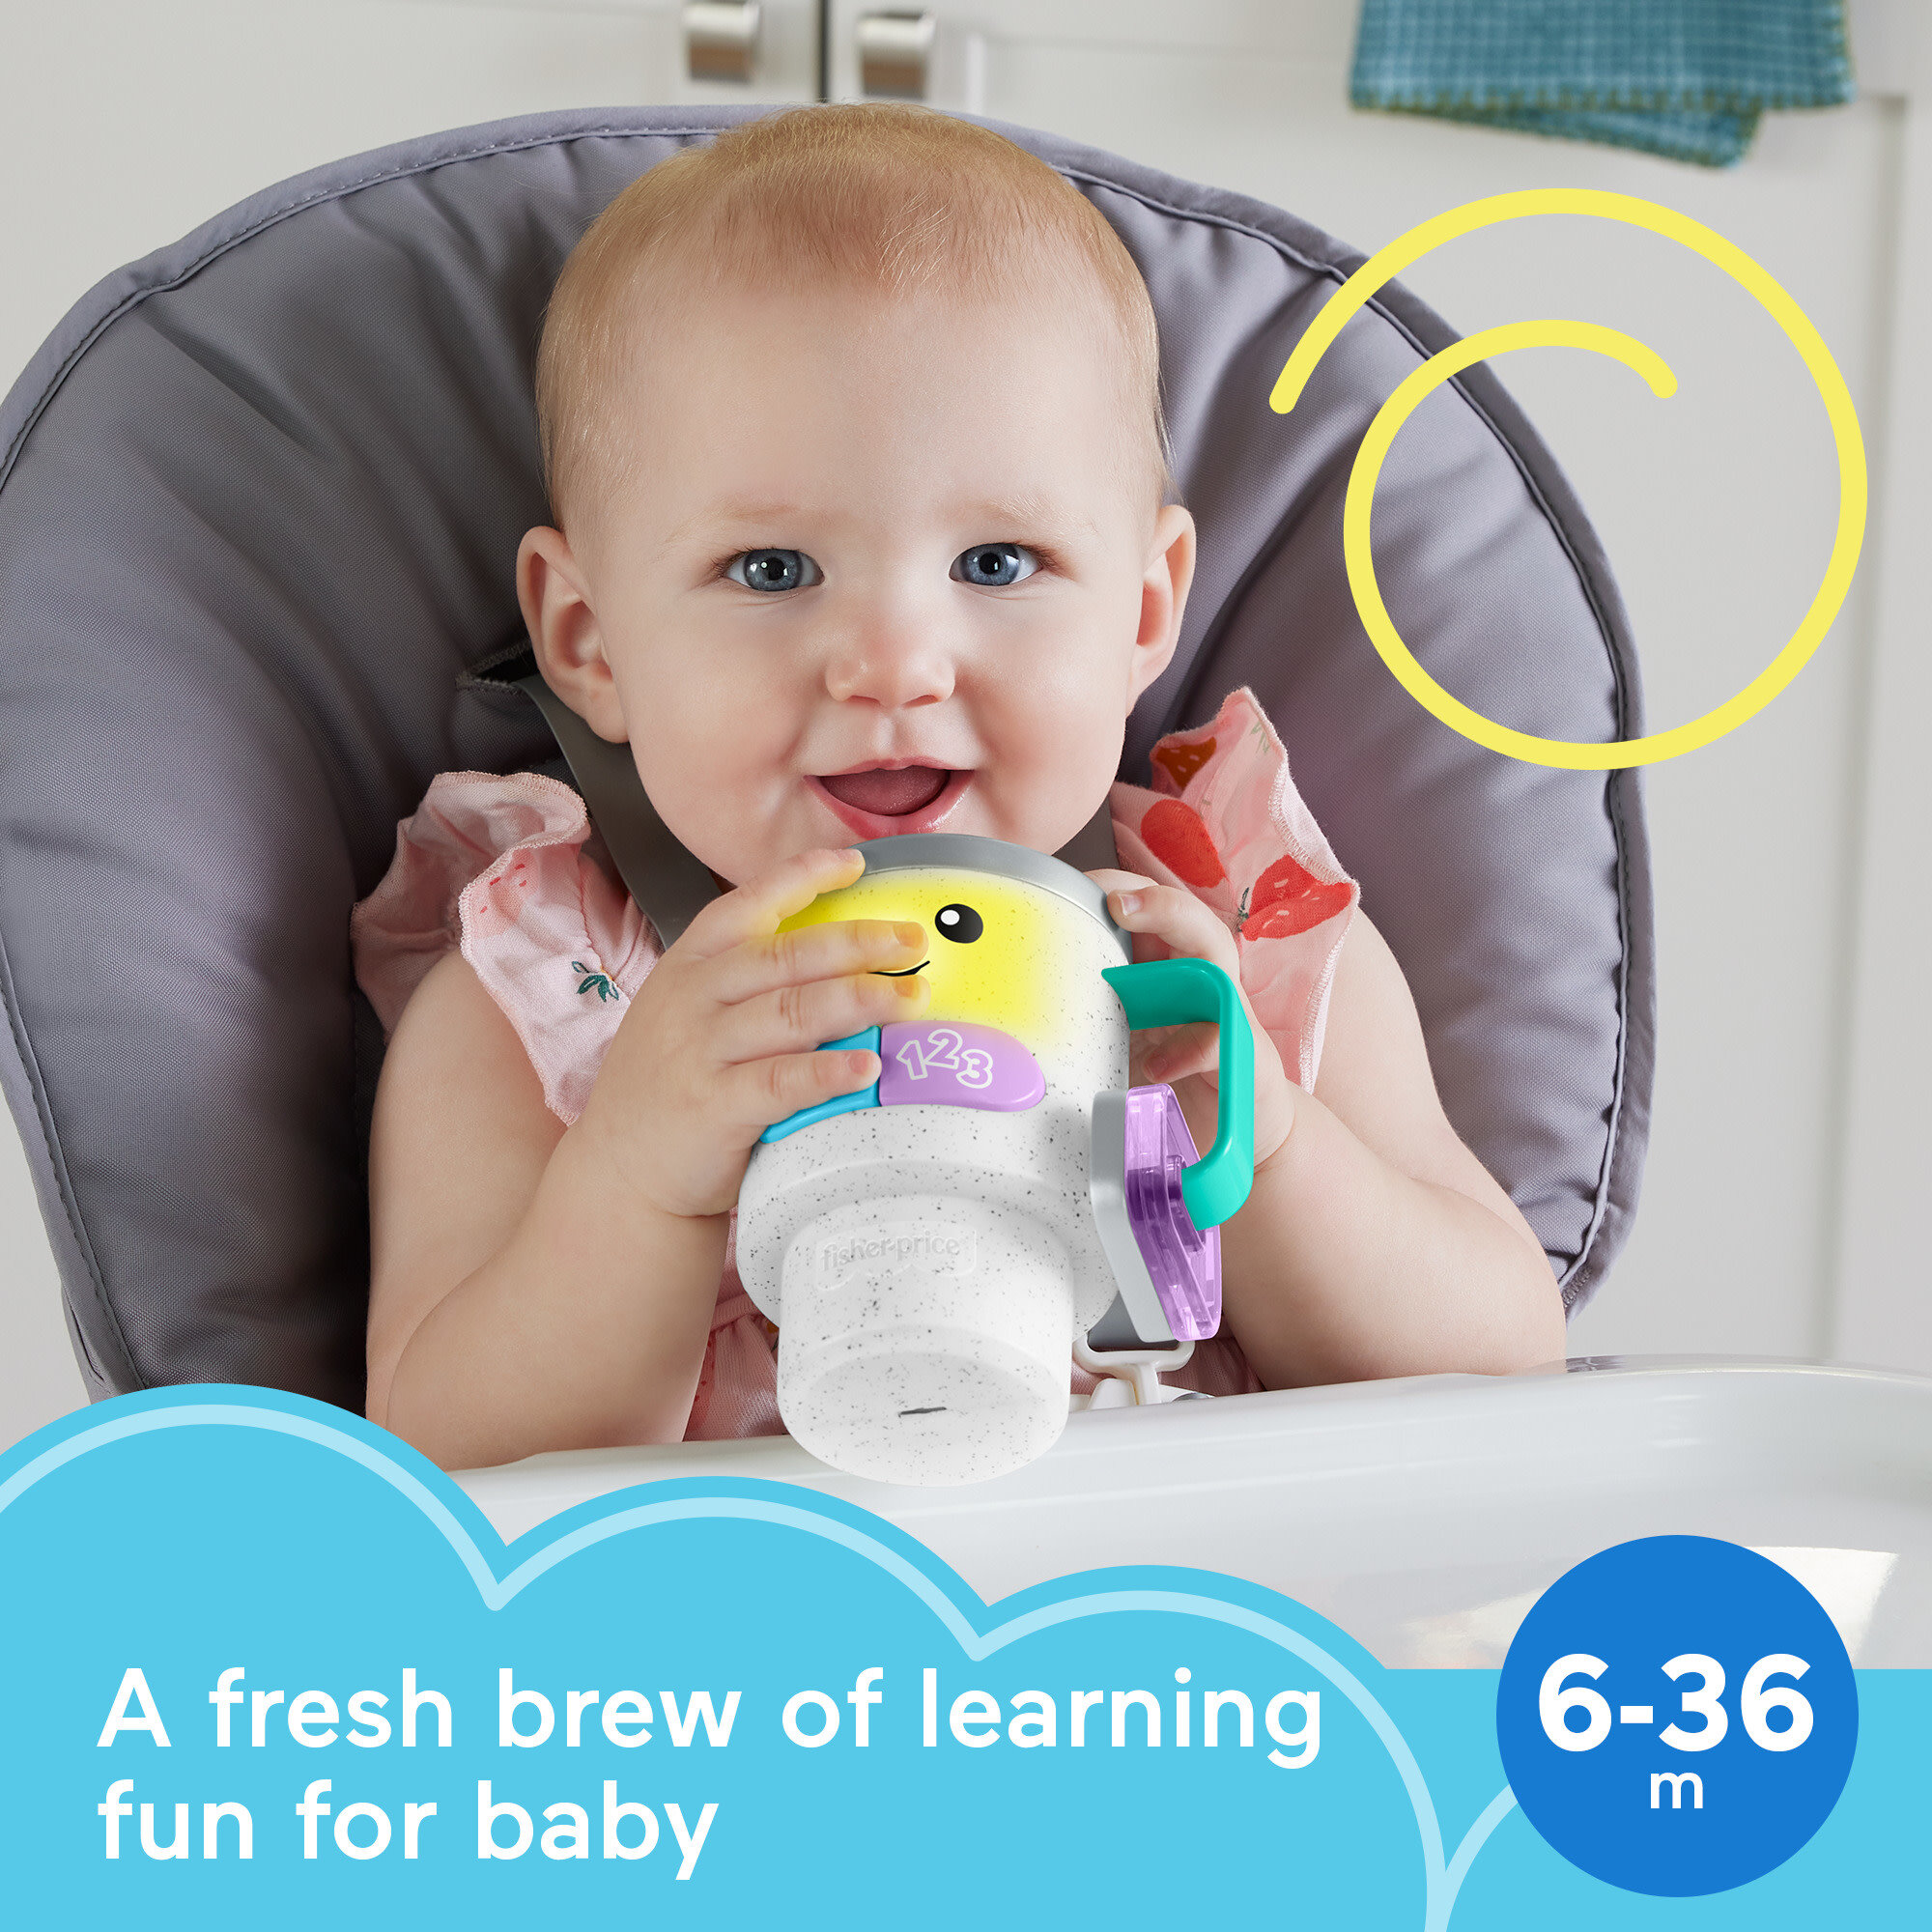 Fisher-Price Laugh & Learn Wake Up & Learn Coffee Mug Baby & Toddler Toy with Music & Lights - image 2 of 6